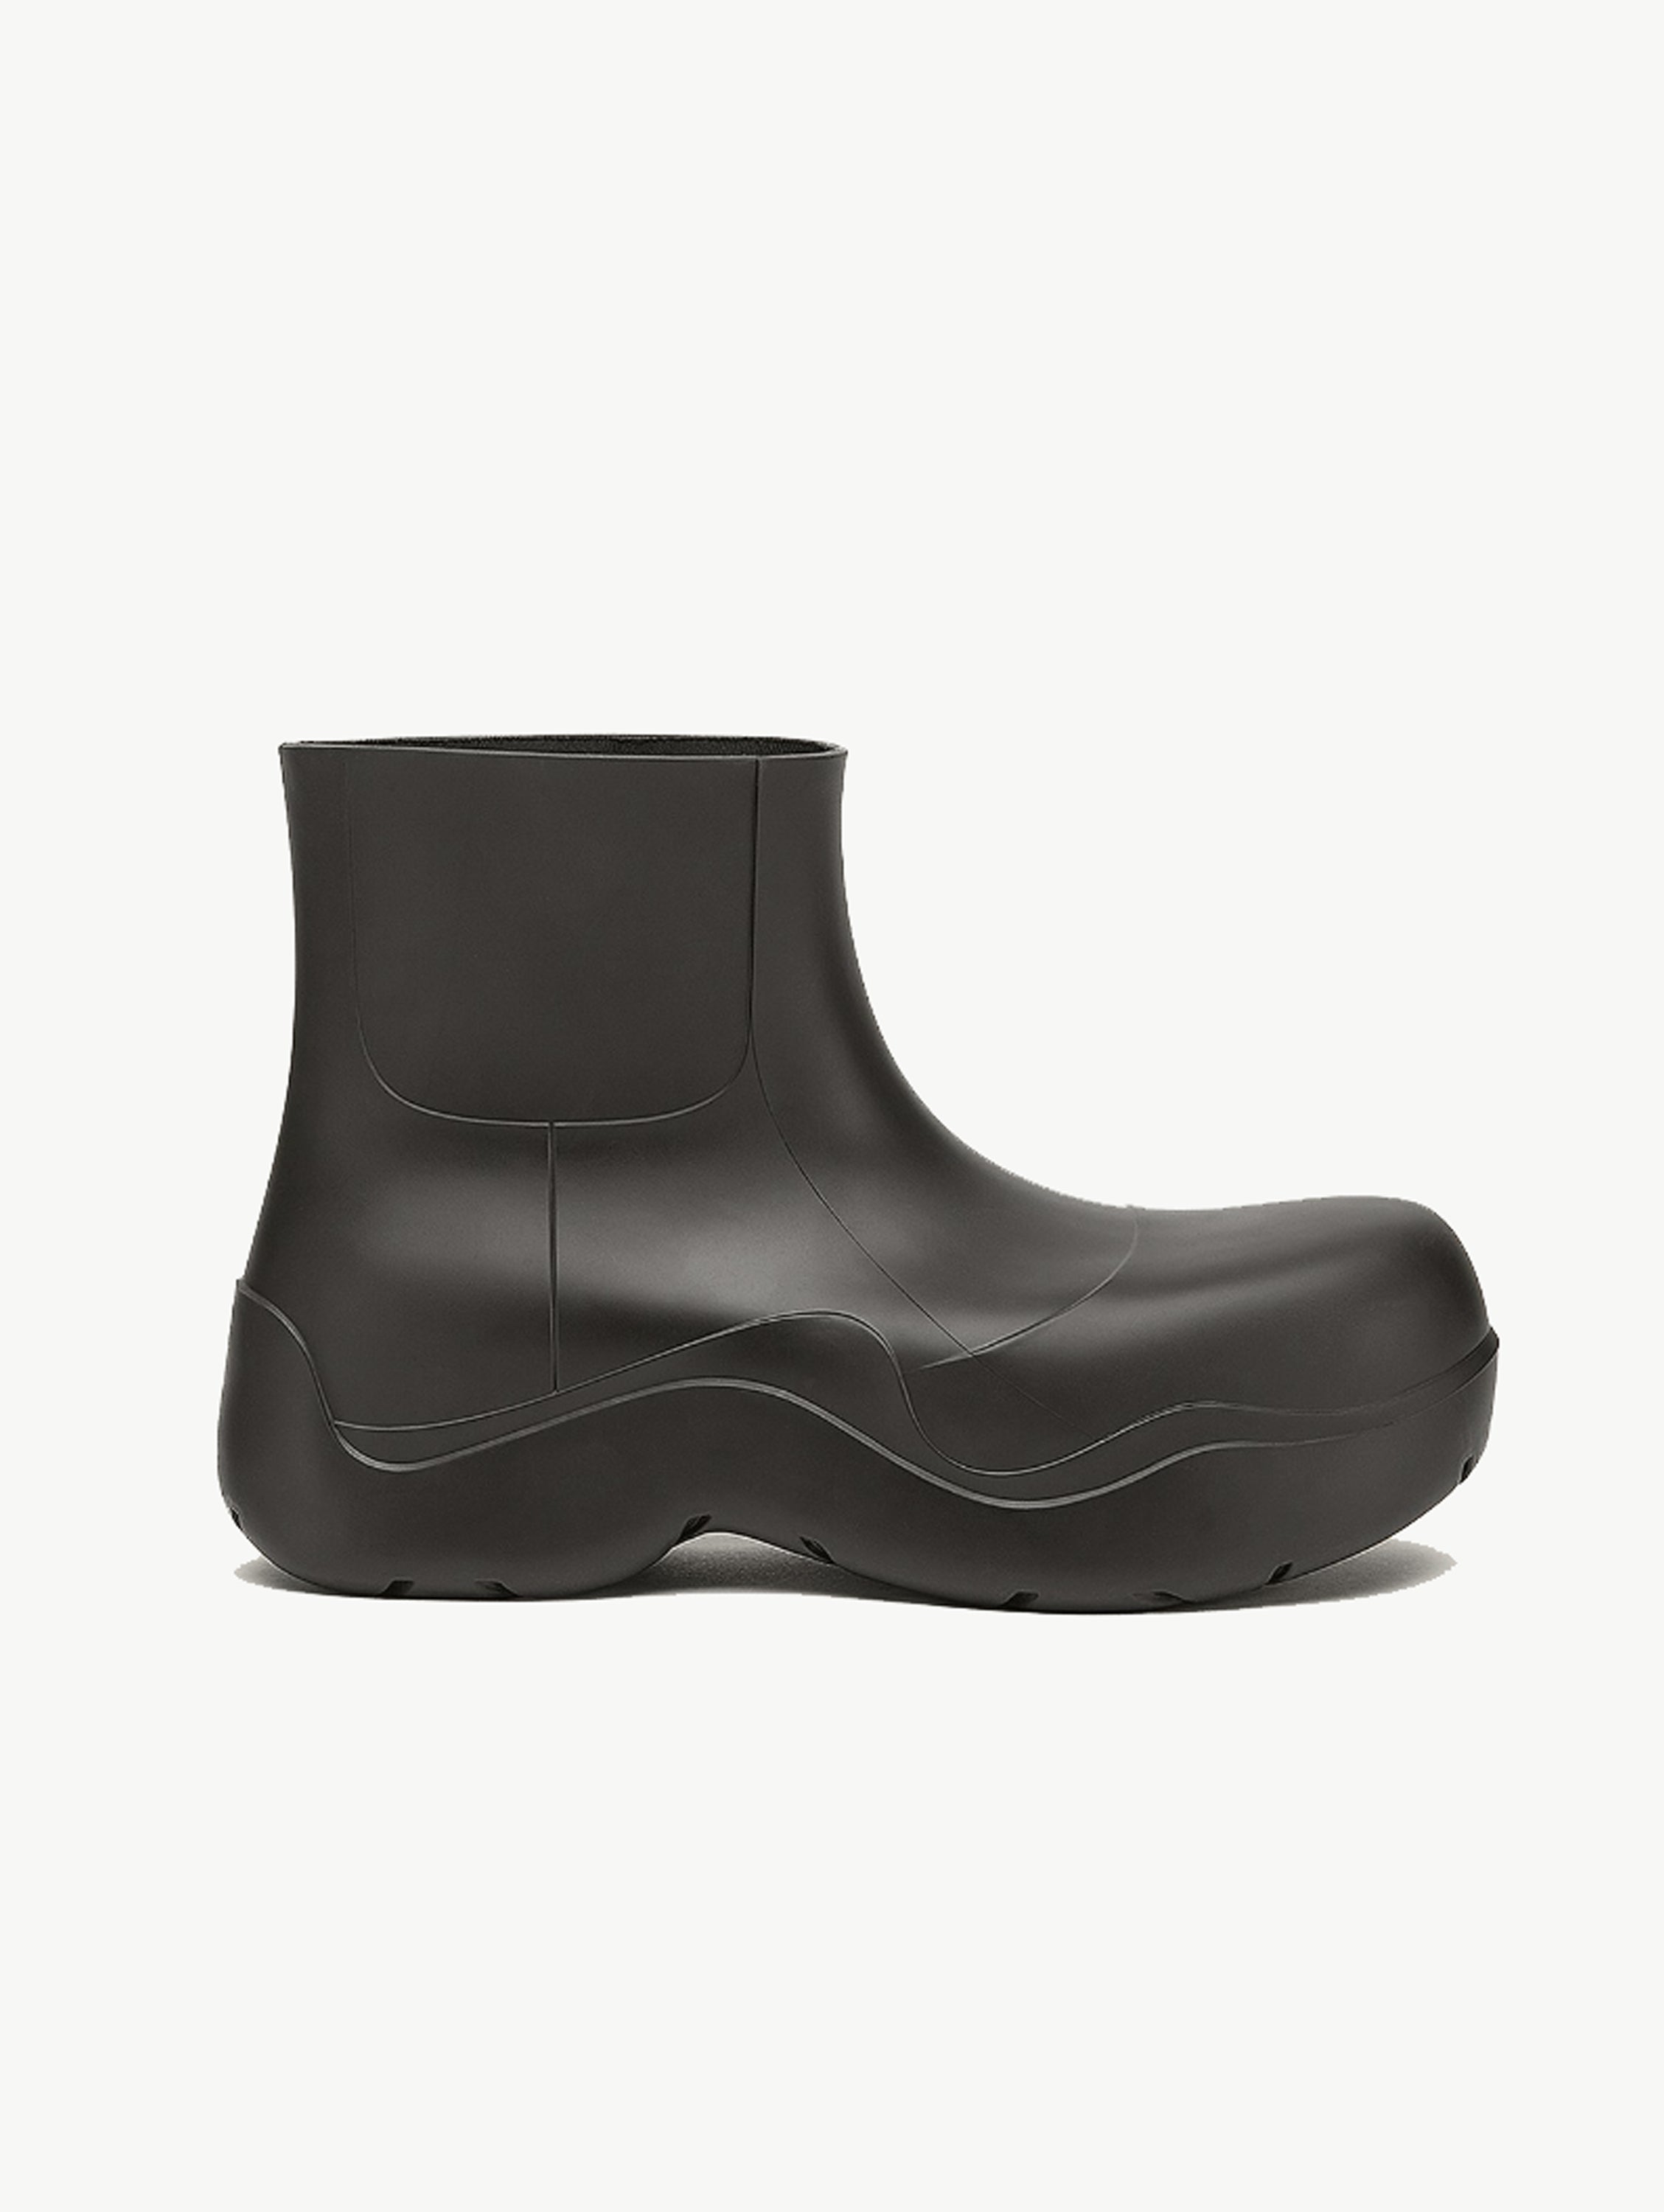 Puddle boots black